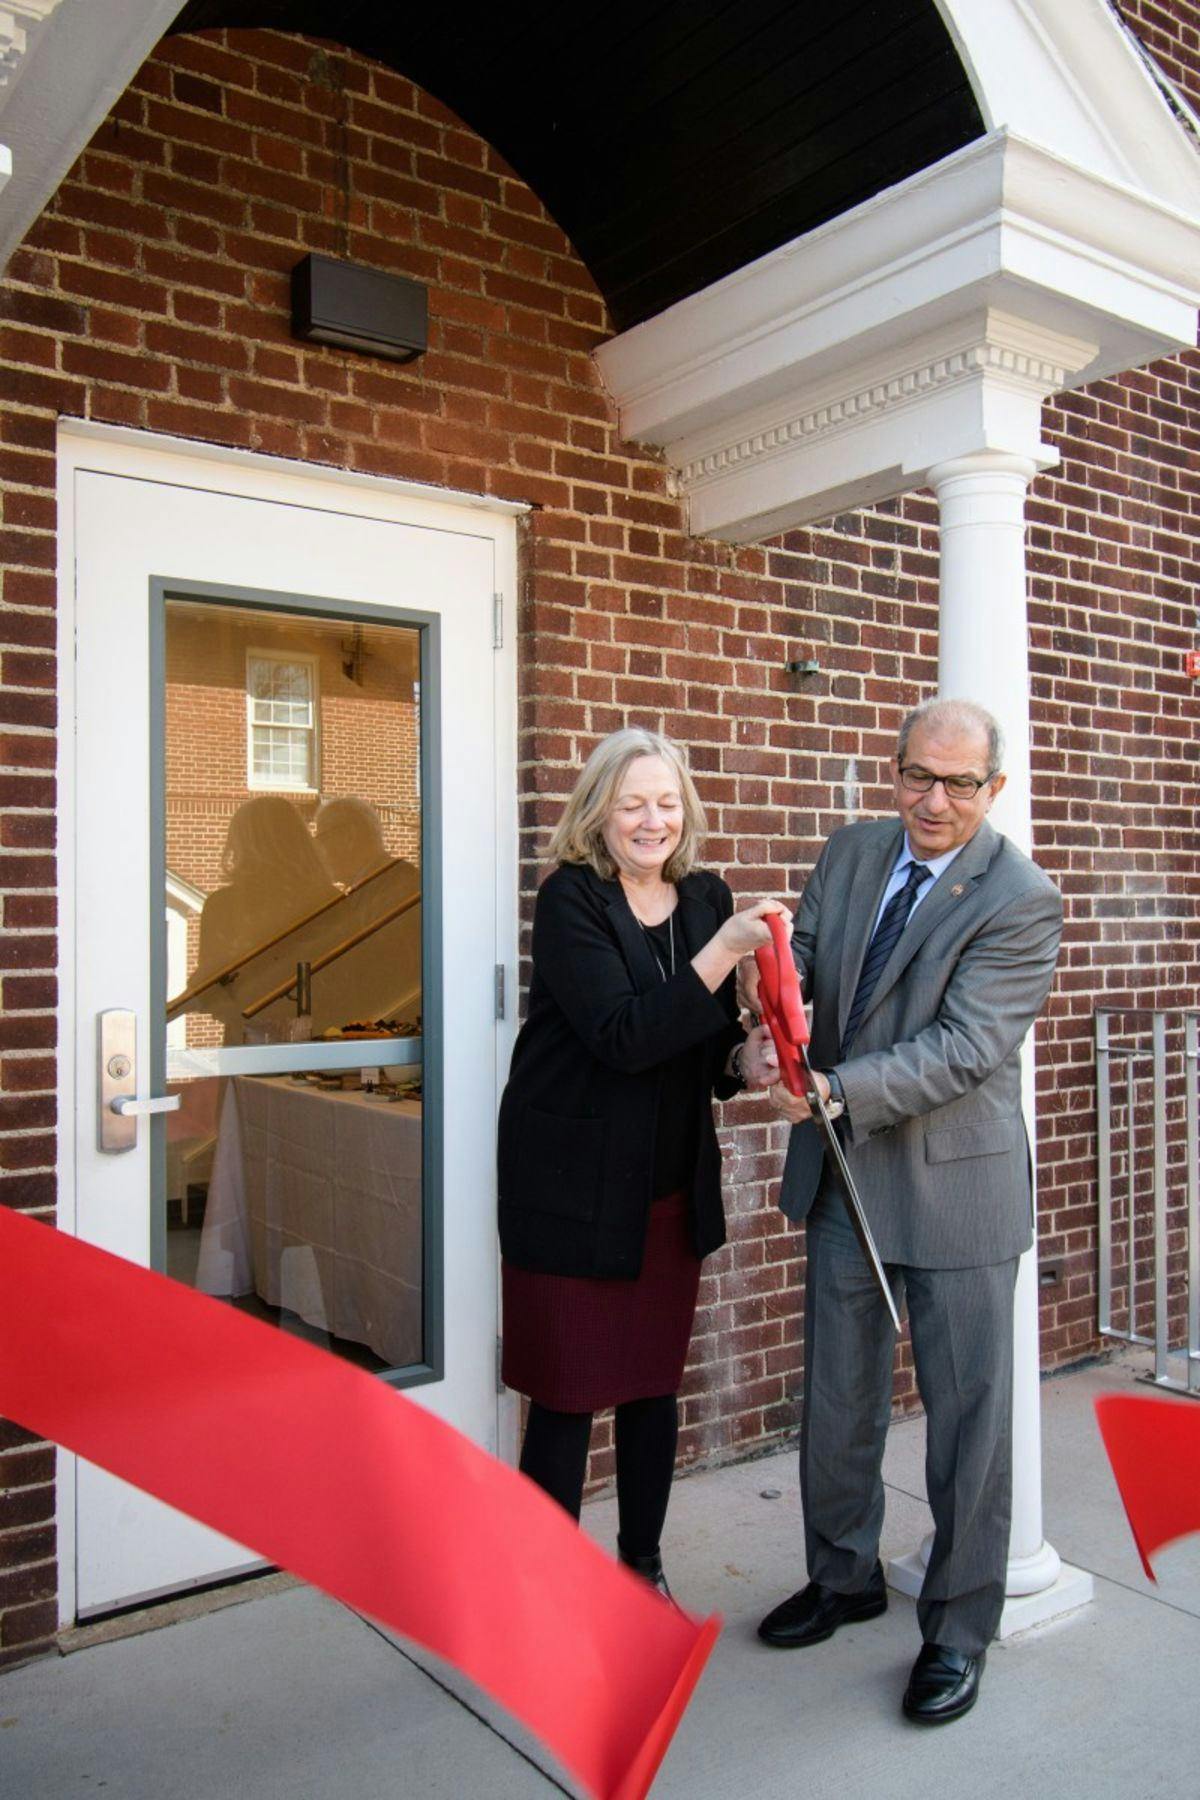 From left to right: Marybeth Murphy, vice president for enrollment management and student affairs, and Stevens President Nariman Farvardin cutting a red ribbon outside the entrance of the Student Wellness Center